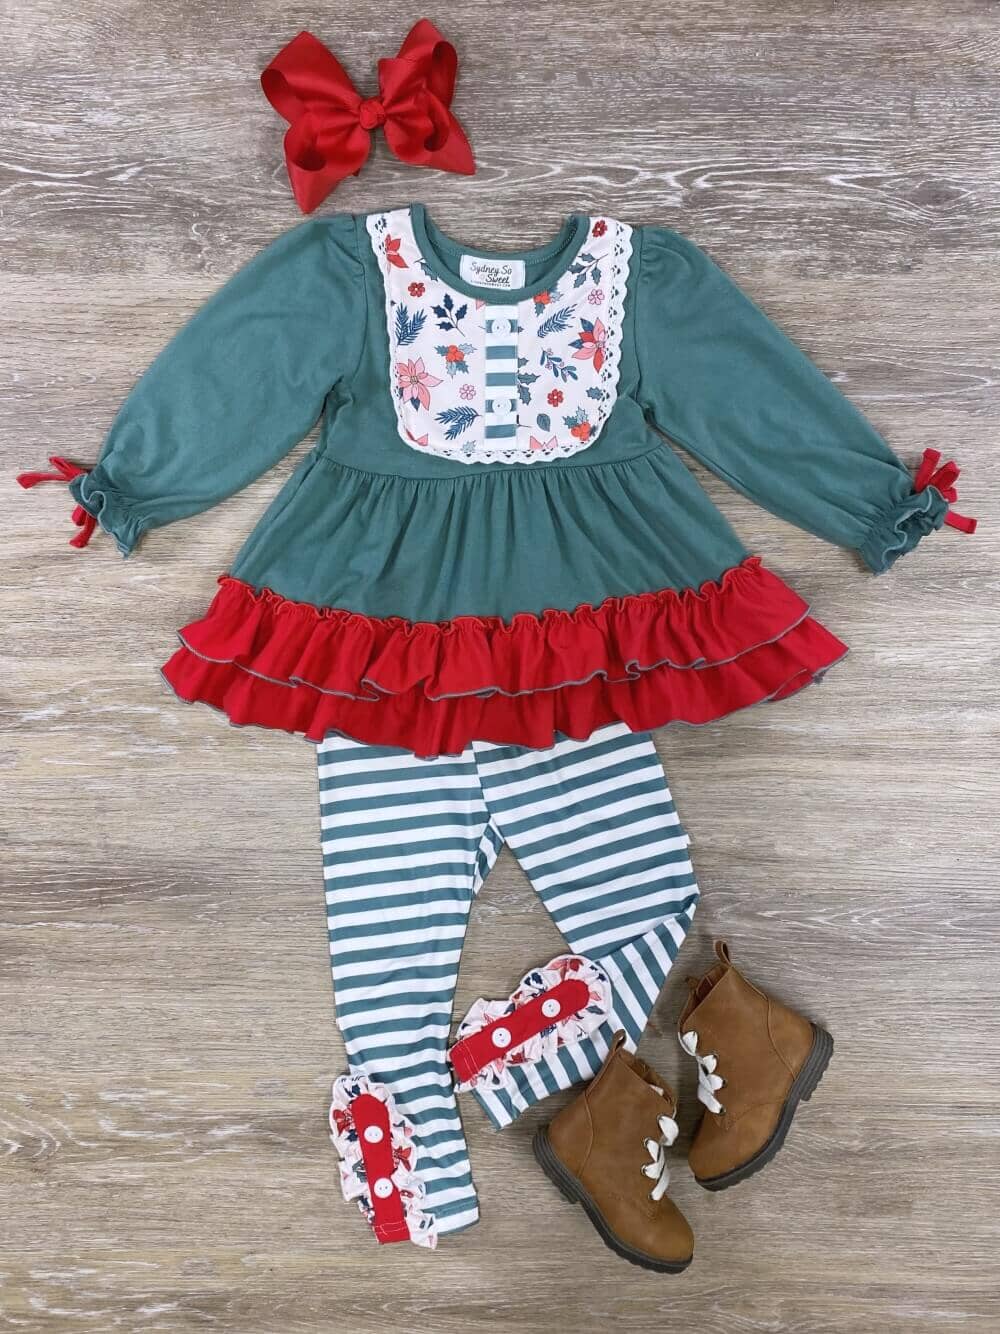 Vintage Green Floral & Stripe Ruffle Girls Outfit - Sydney So Sweet